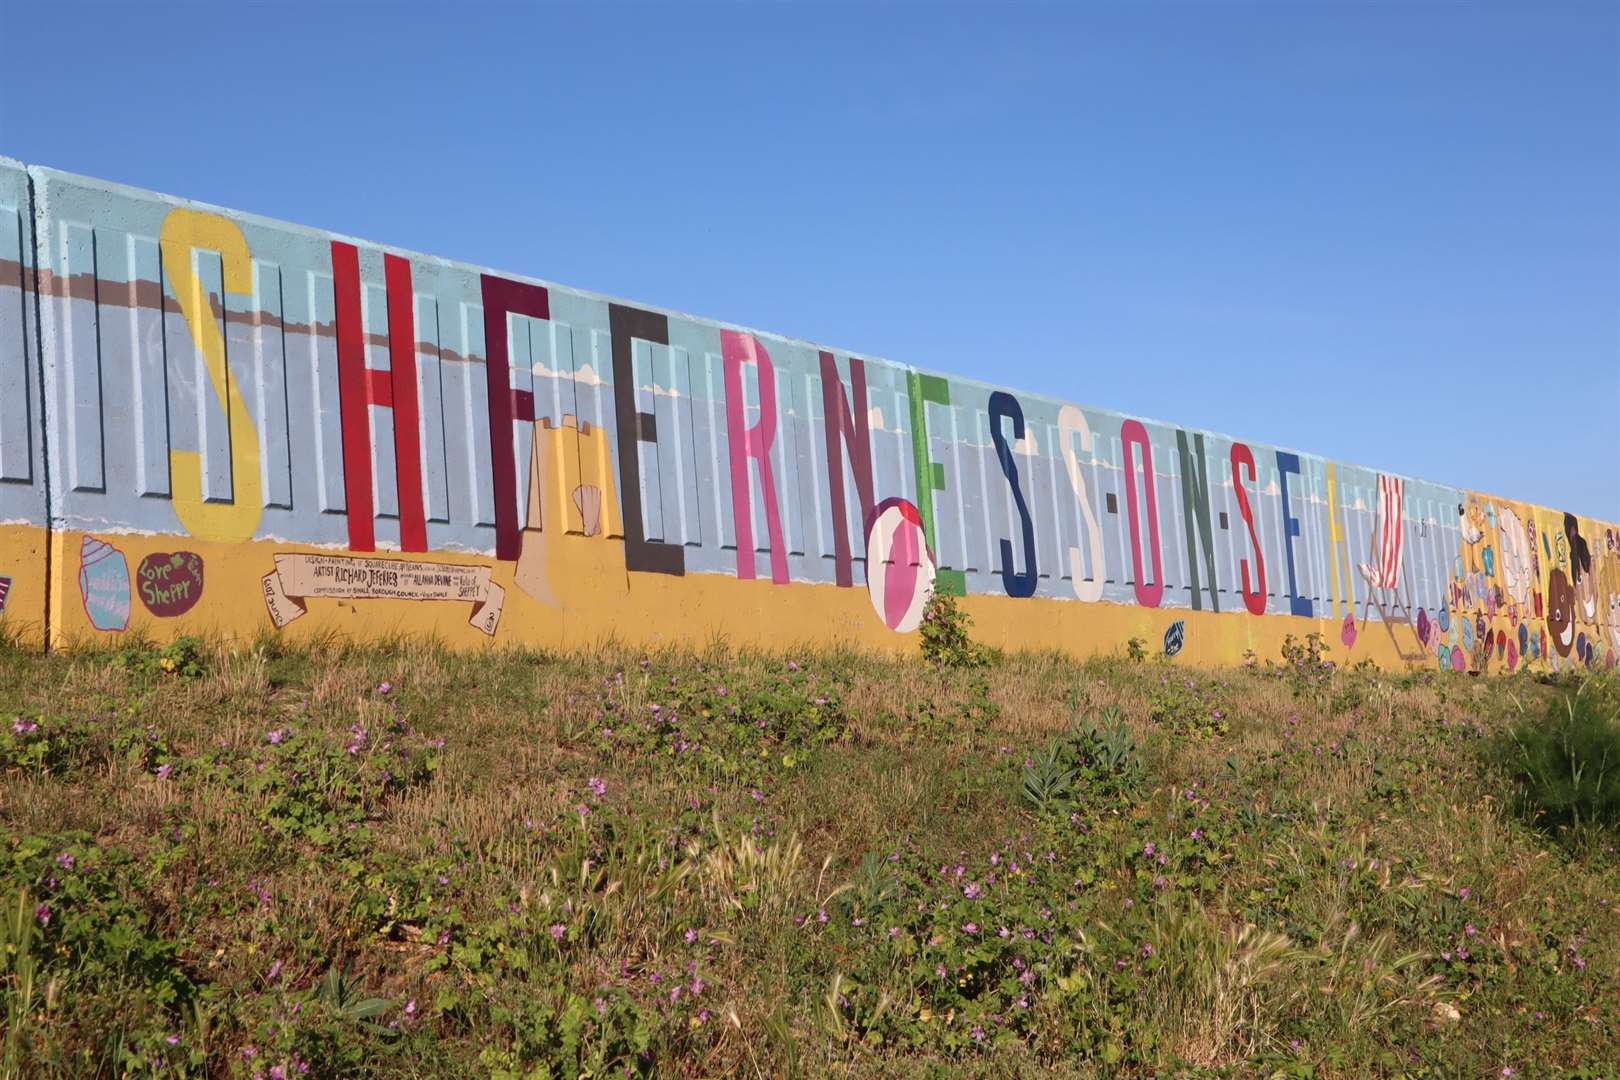 Sheerness-on-Sea mural